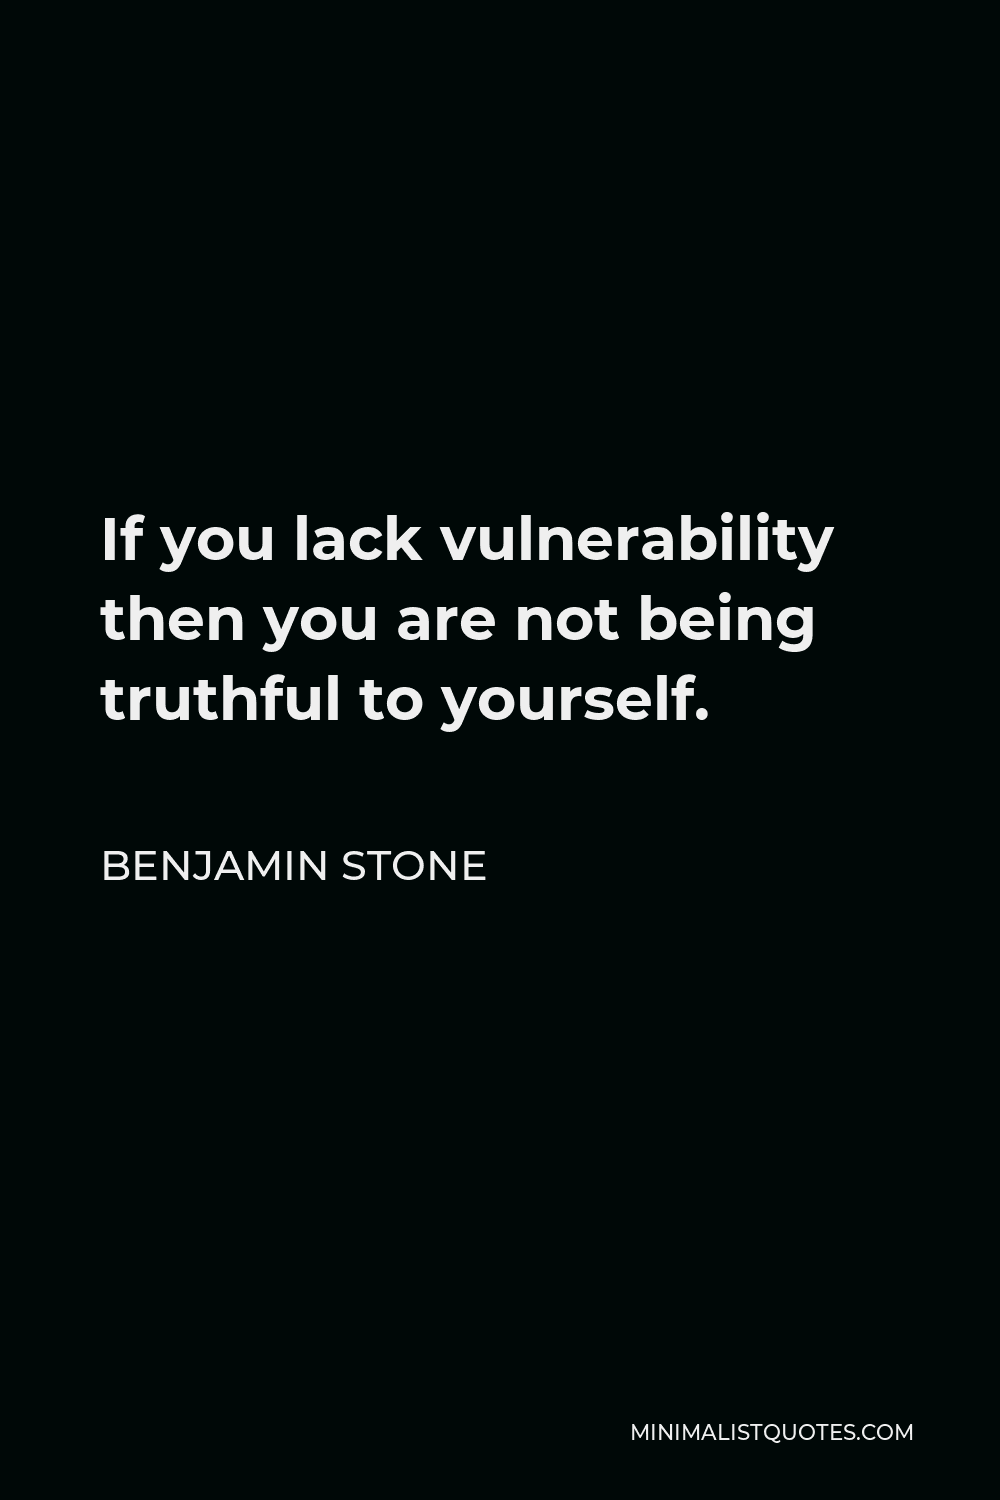 Benjamin Stone Quote - If you lack vulnerability then you are not being truthful to yourself.